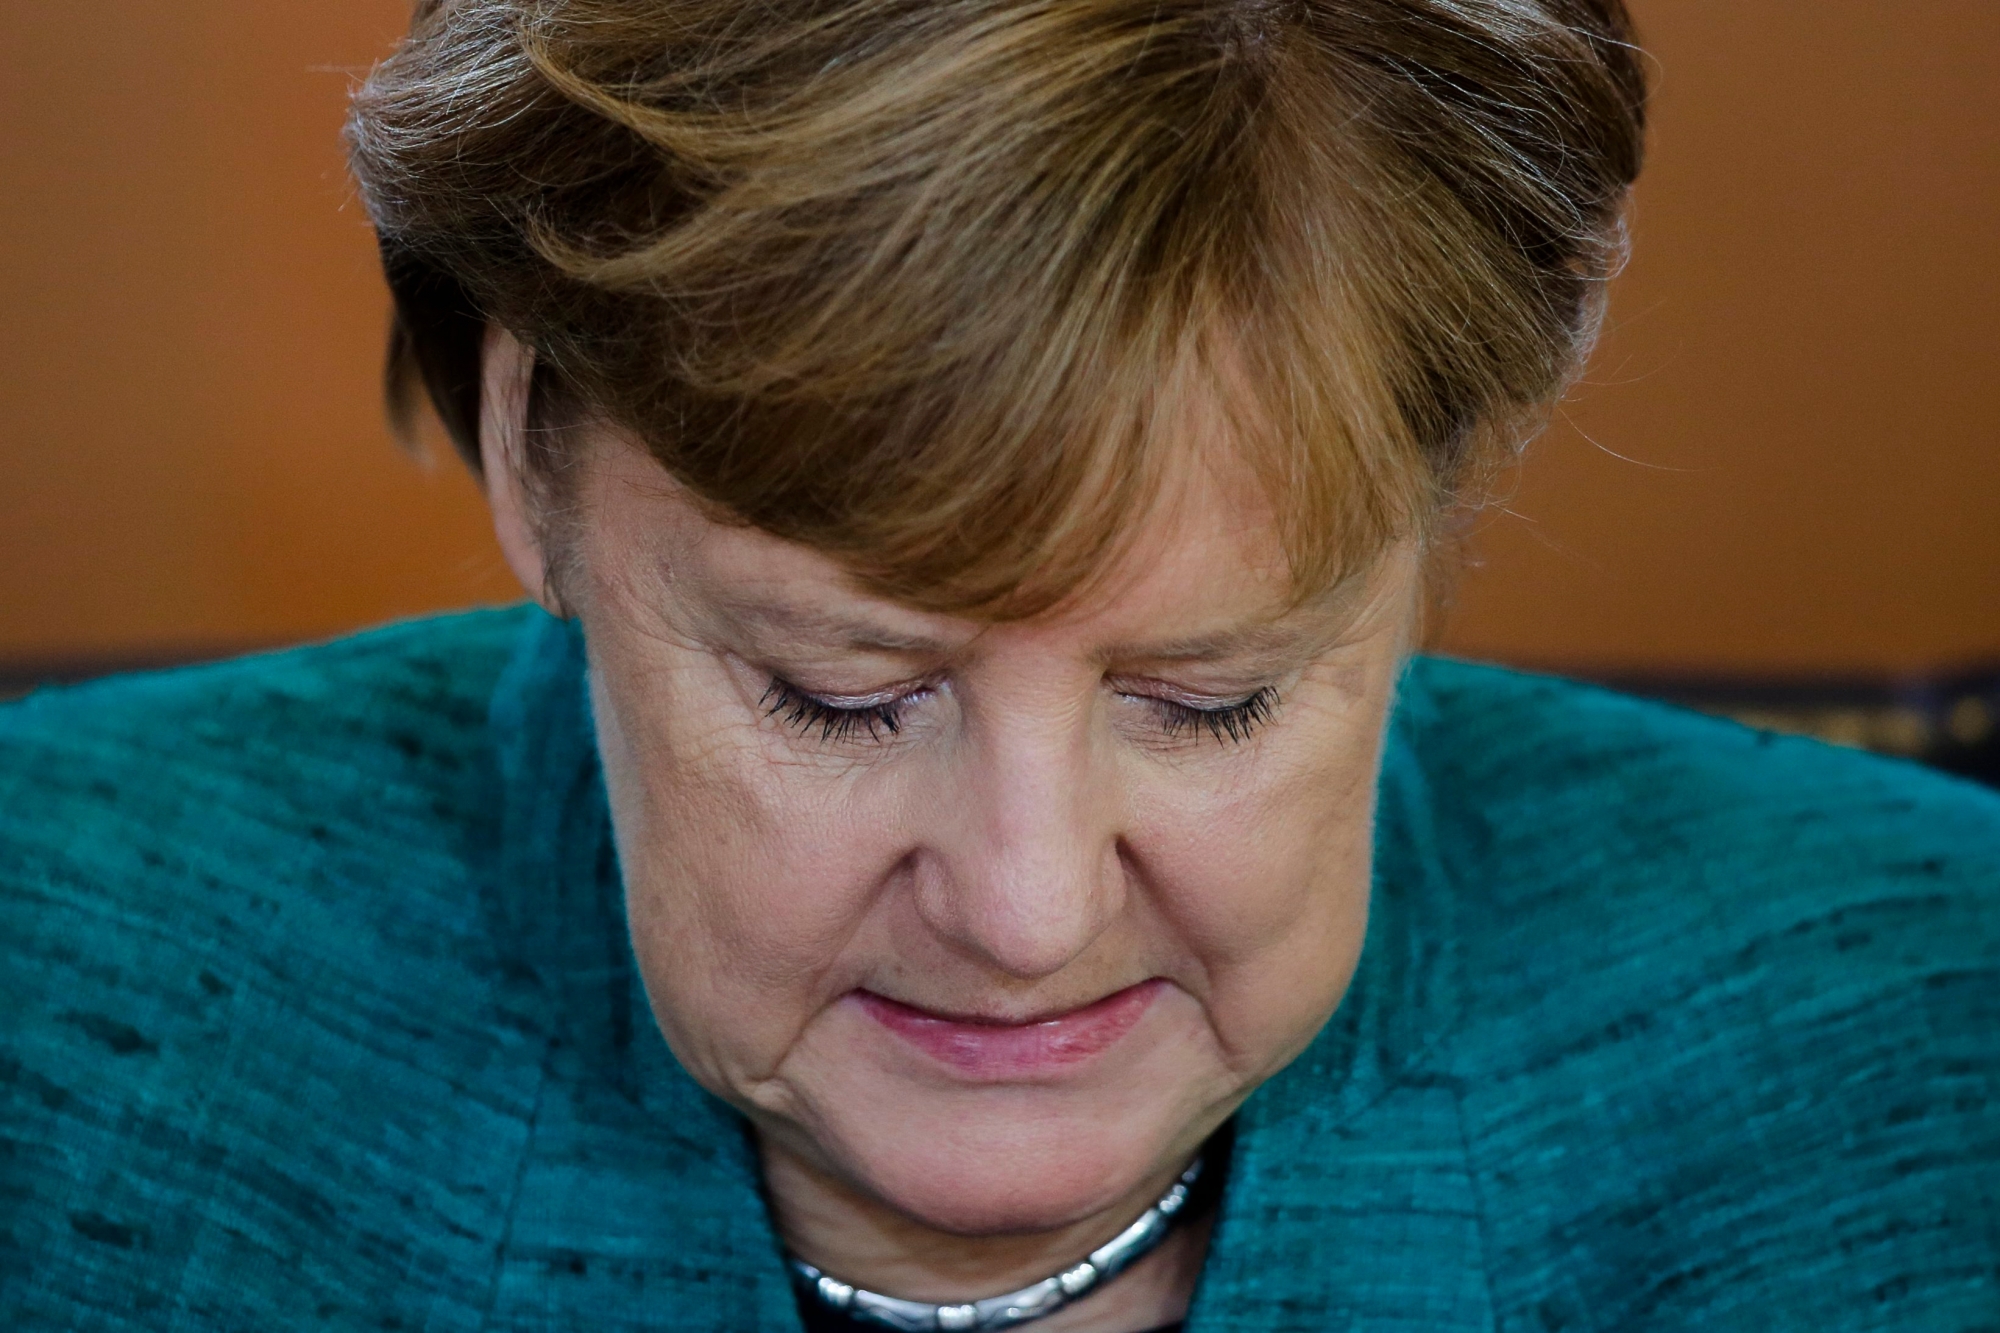 German Chancellor Angela Merkel attends a cabinet meeting of the German government at the chancellery in Berlin, Wednesday, Oct. 18, 2017. (AP Photo/Markus Schreiber) Germany Government